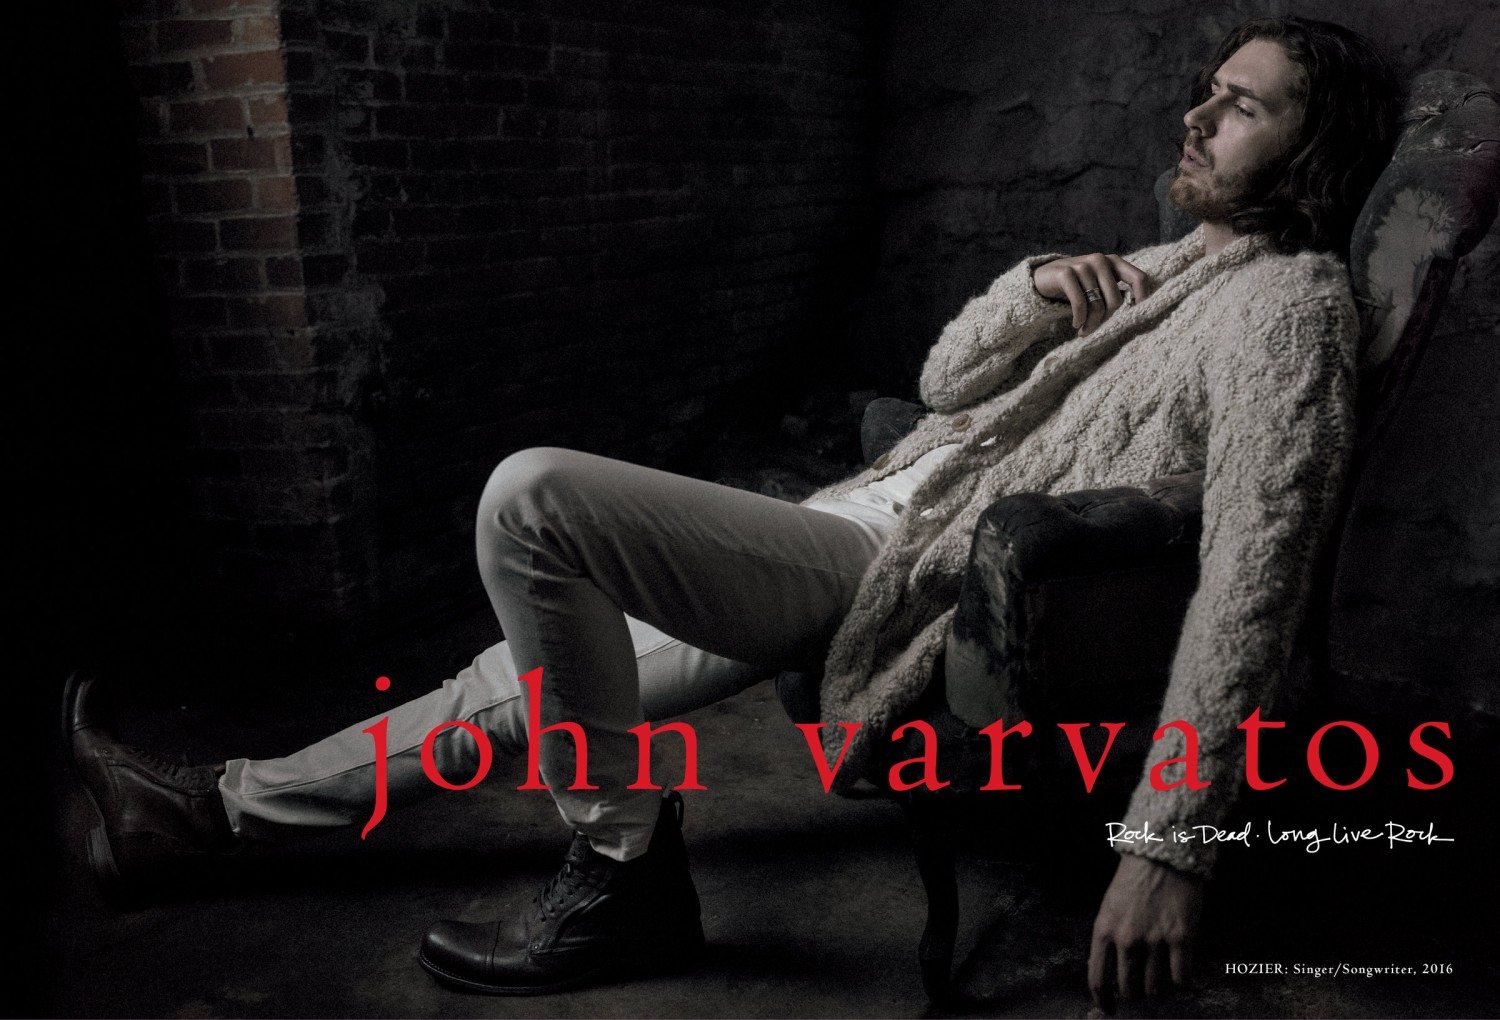 John Varvatos Announces Hozier As The Face Of Its Fall/Winter 2016 Advertising Campaign